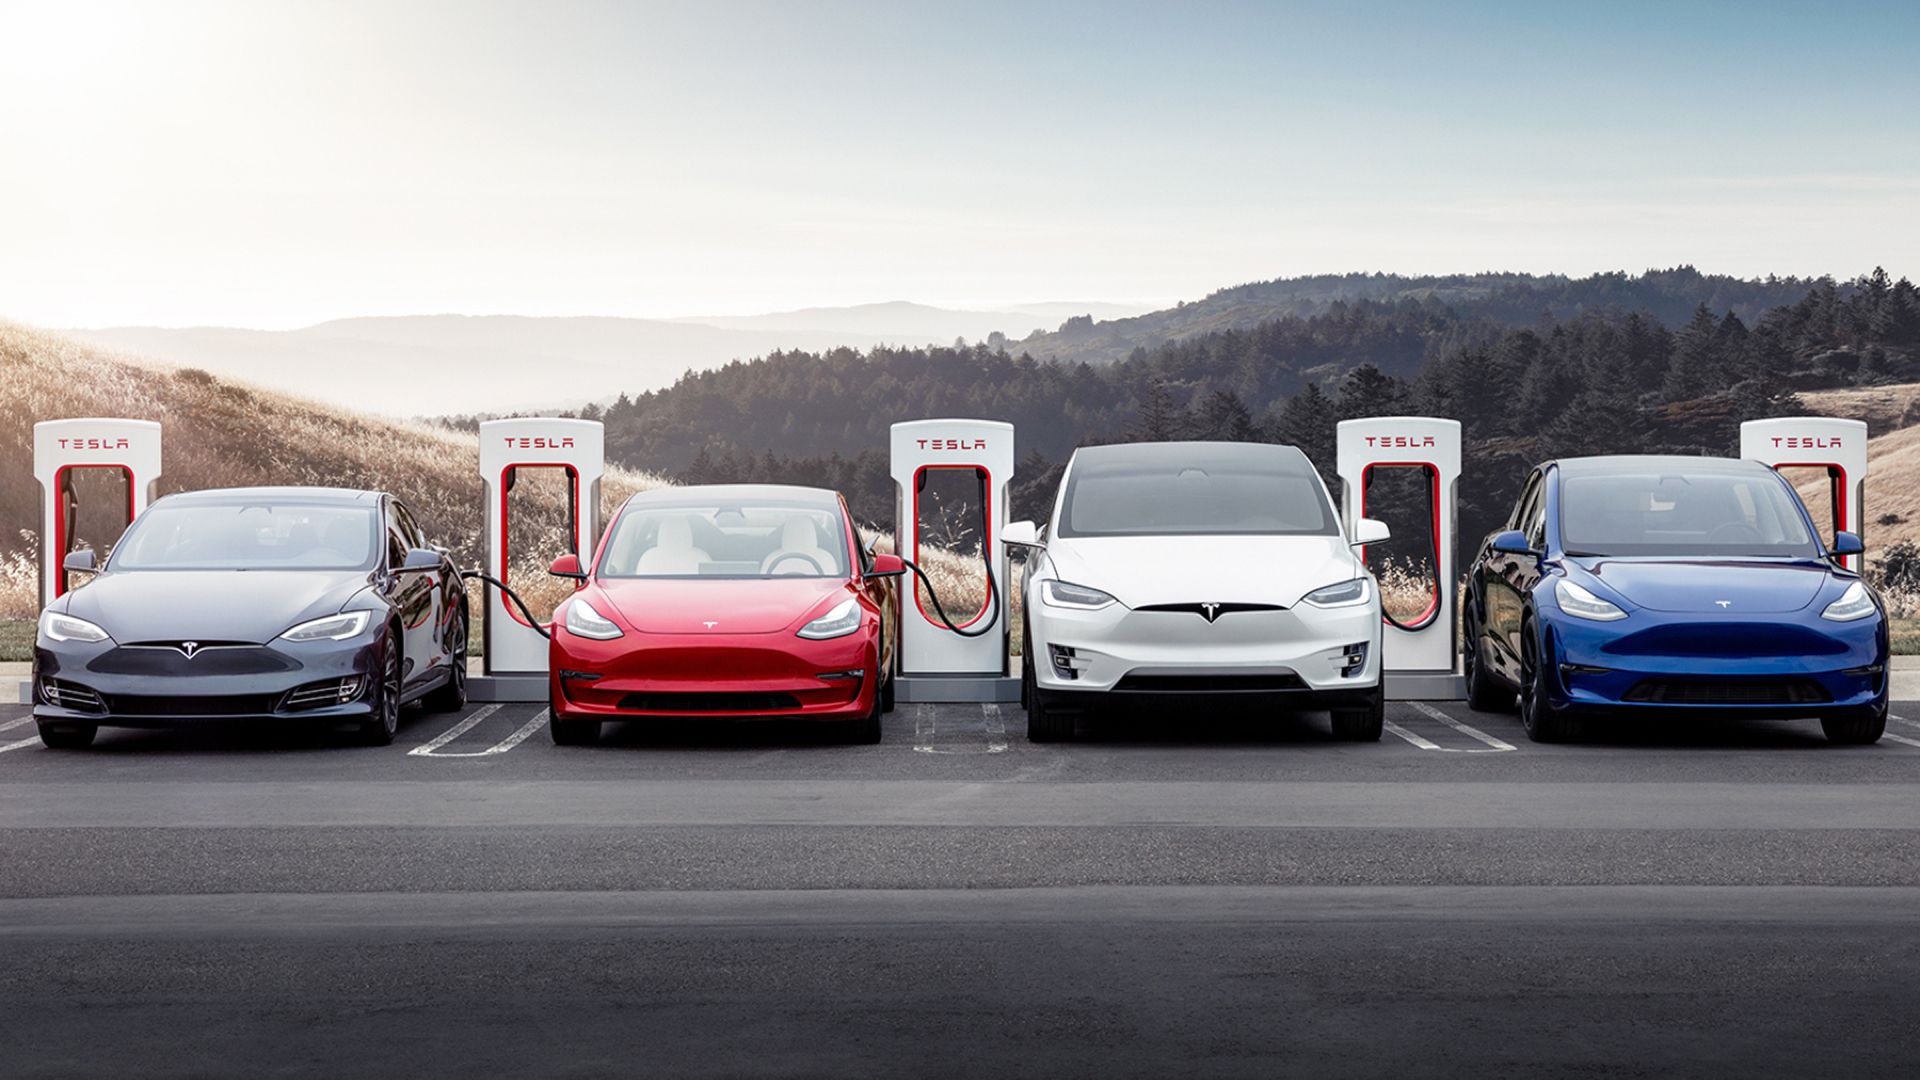 Photograph of four different Tesla models at charging stations.